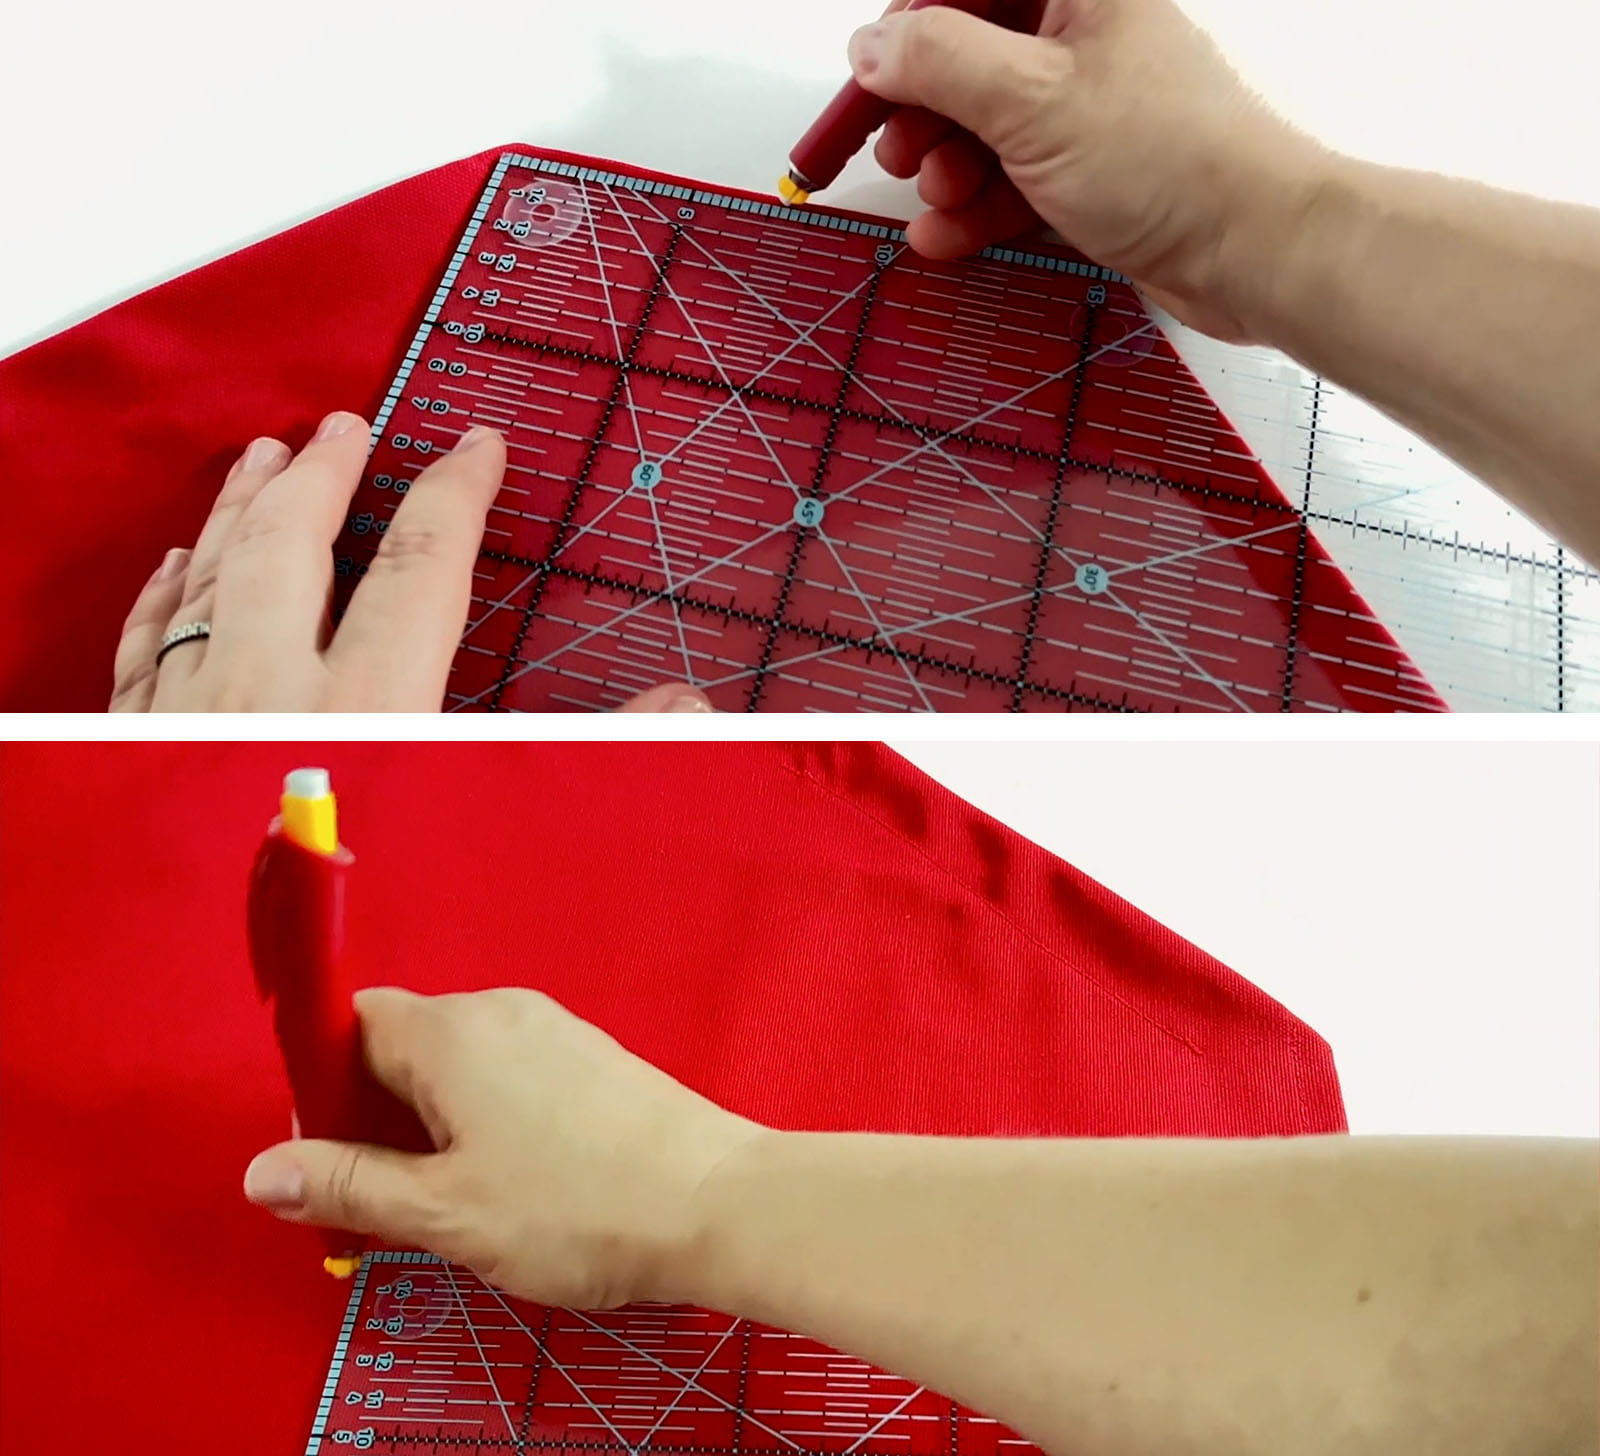 Drawing white marks on red fabric